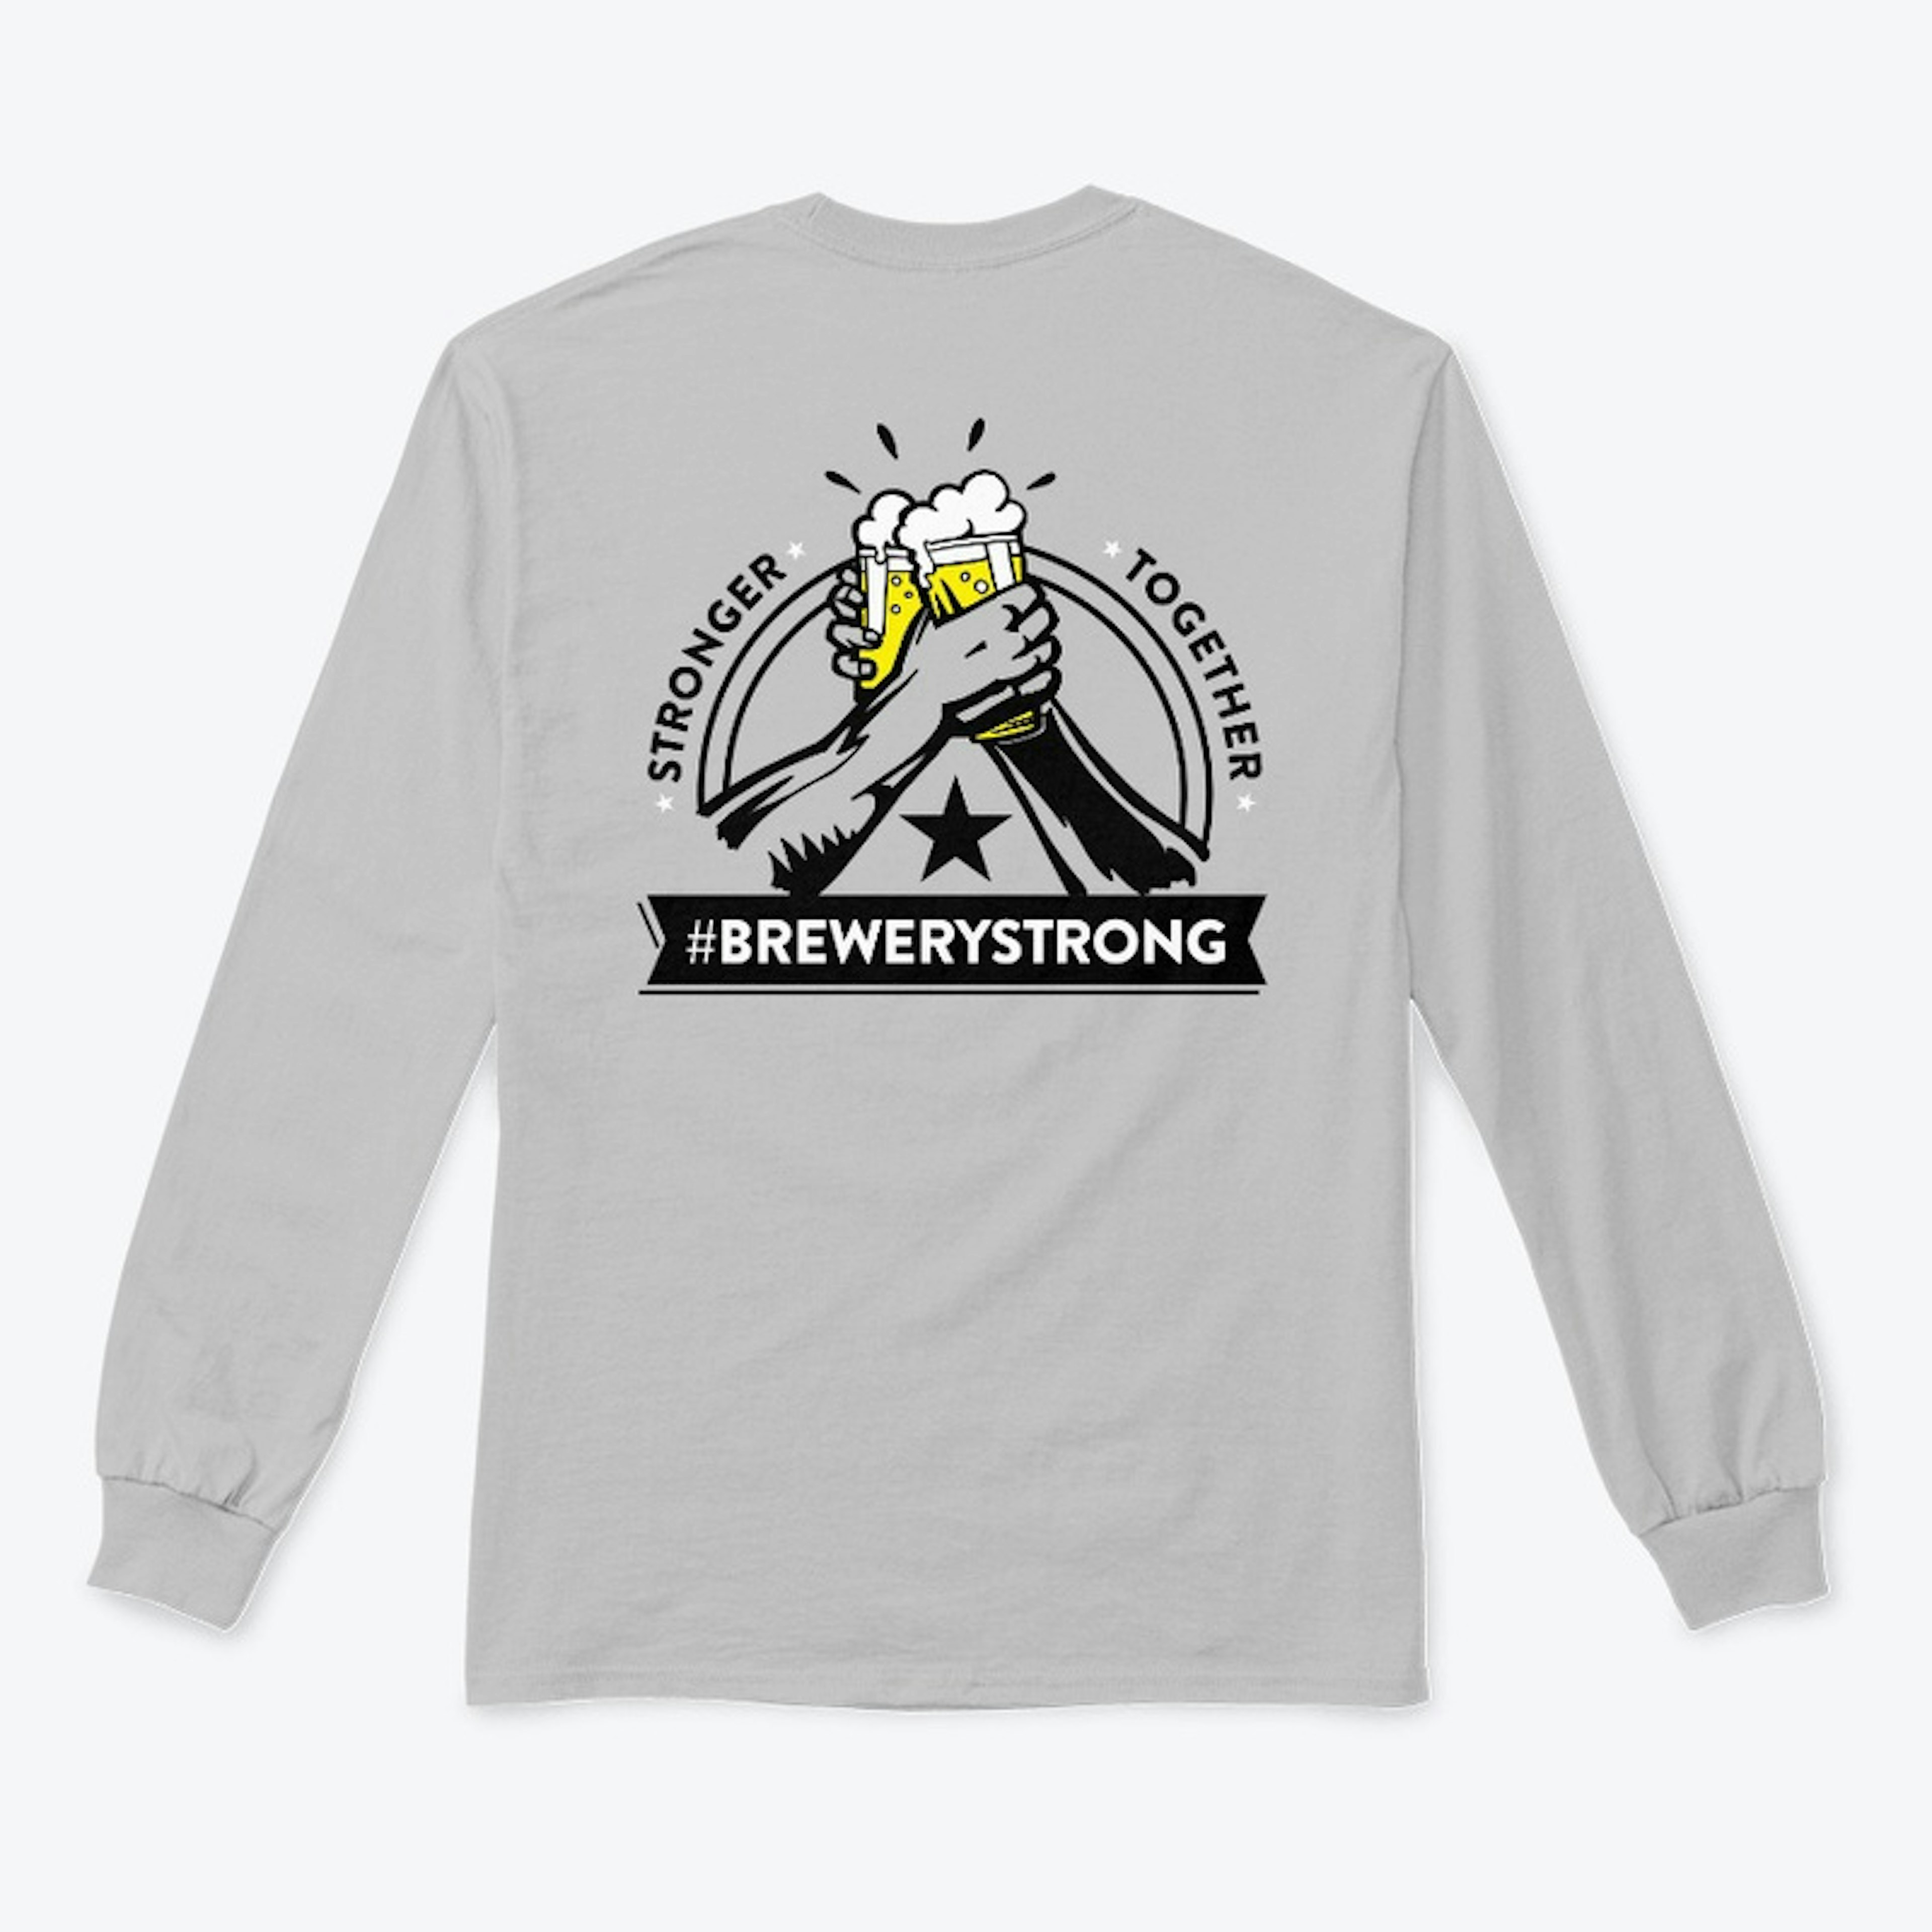 Brewery Strong!